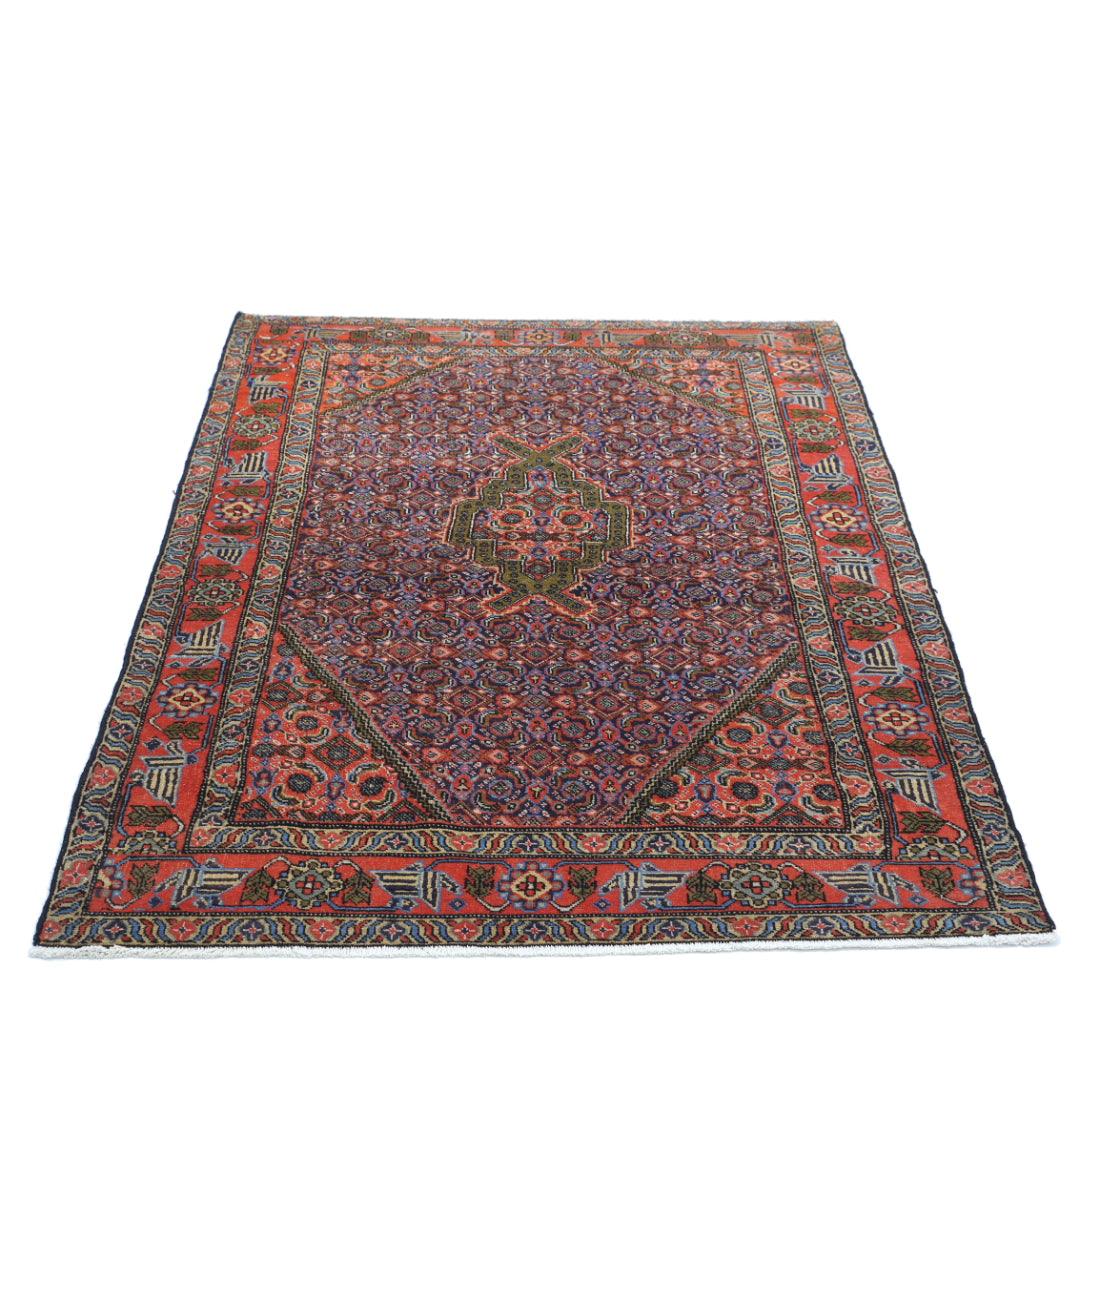 Hand Knotted Persian Moud Wool Rug - 3'9'' x 5'1'' 3'9'' x 5'1'' (113 X 153) / Blue / Rust